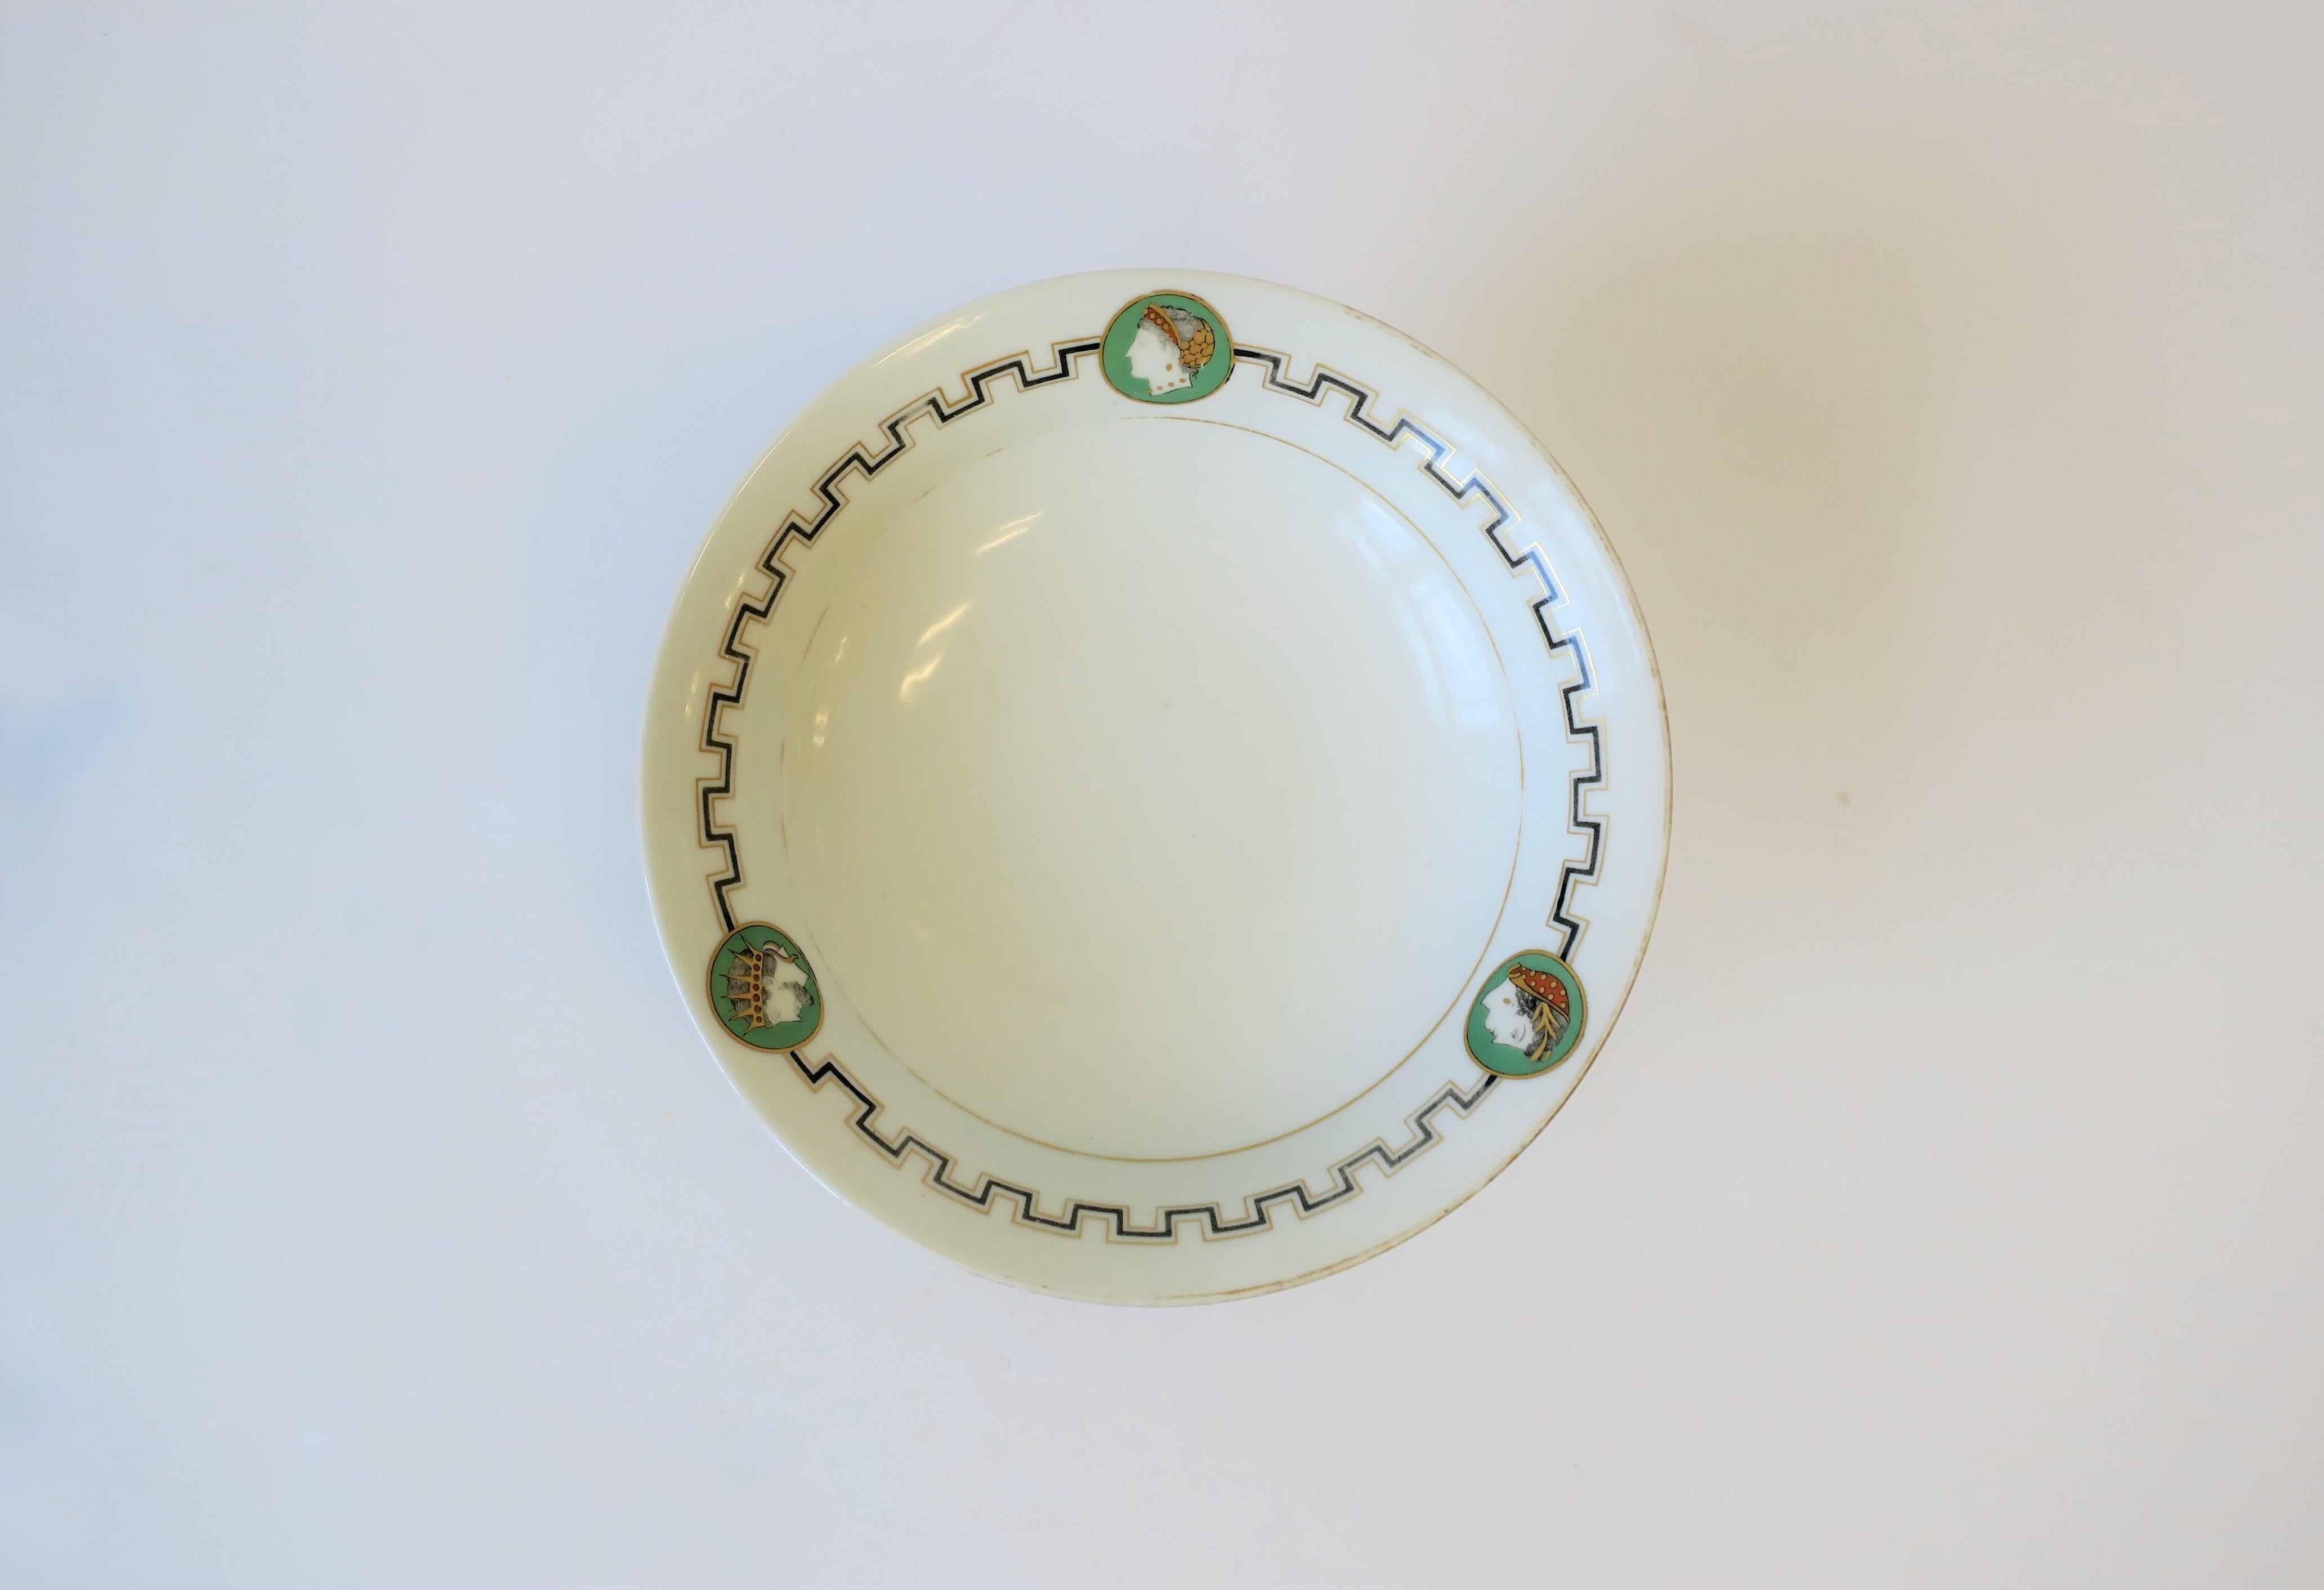 Ceramic Italian White Black and Gold Tazza or Compote Bowl with Greek-Key Design